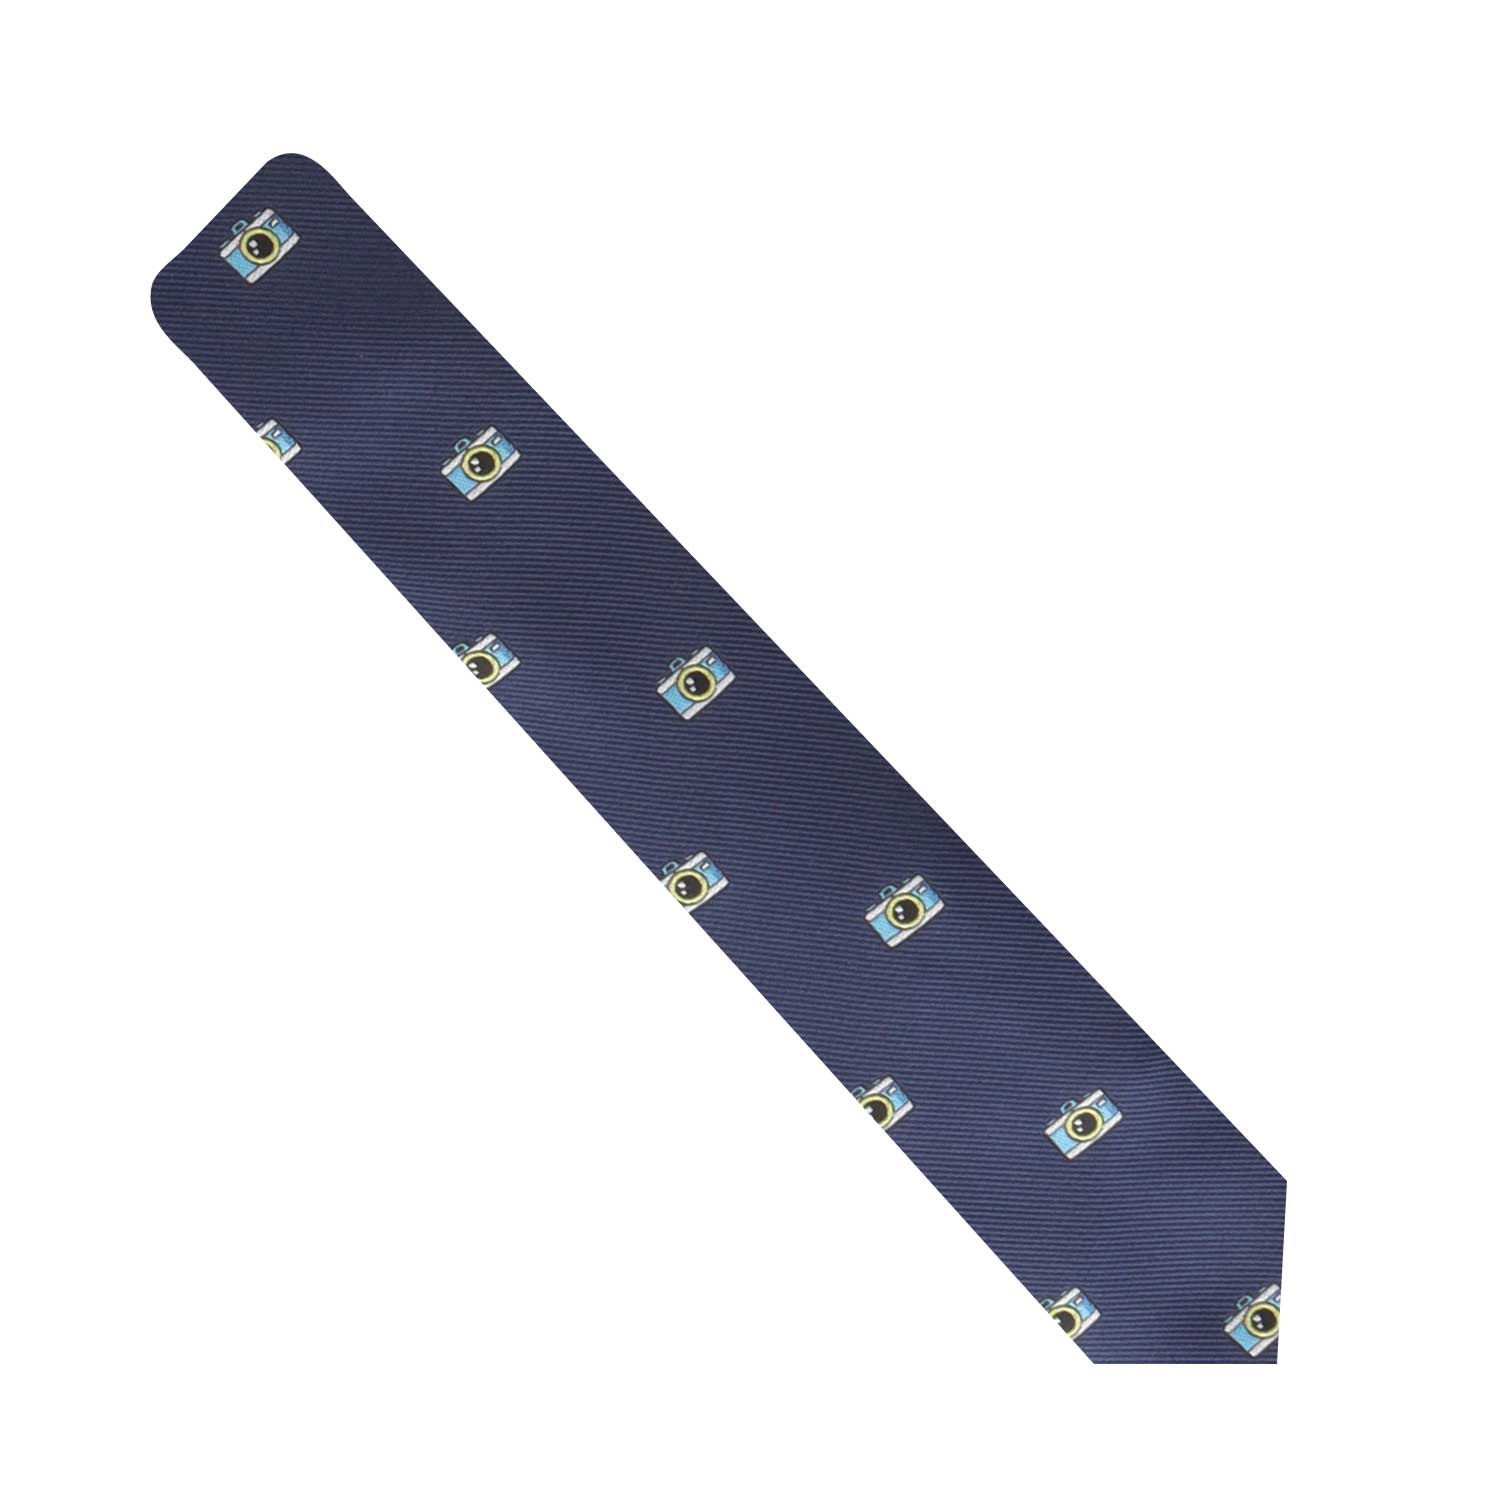 A Camera Skinny Tie with blue and yellow squares on it, adding a touch of panache.